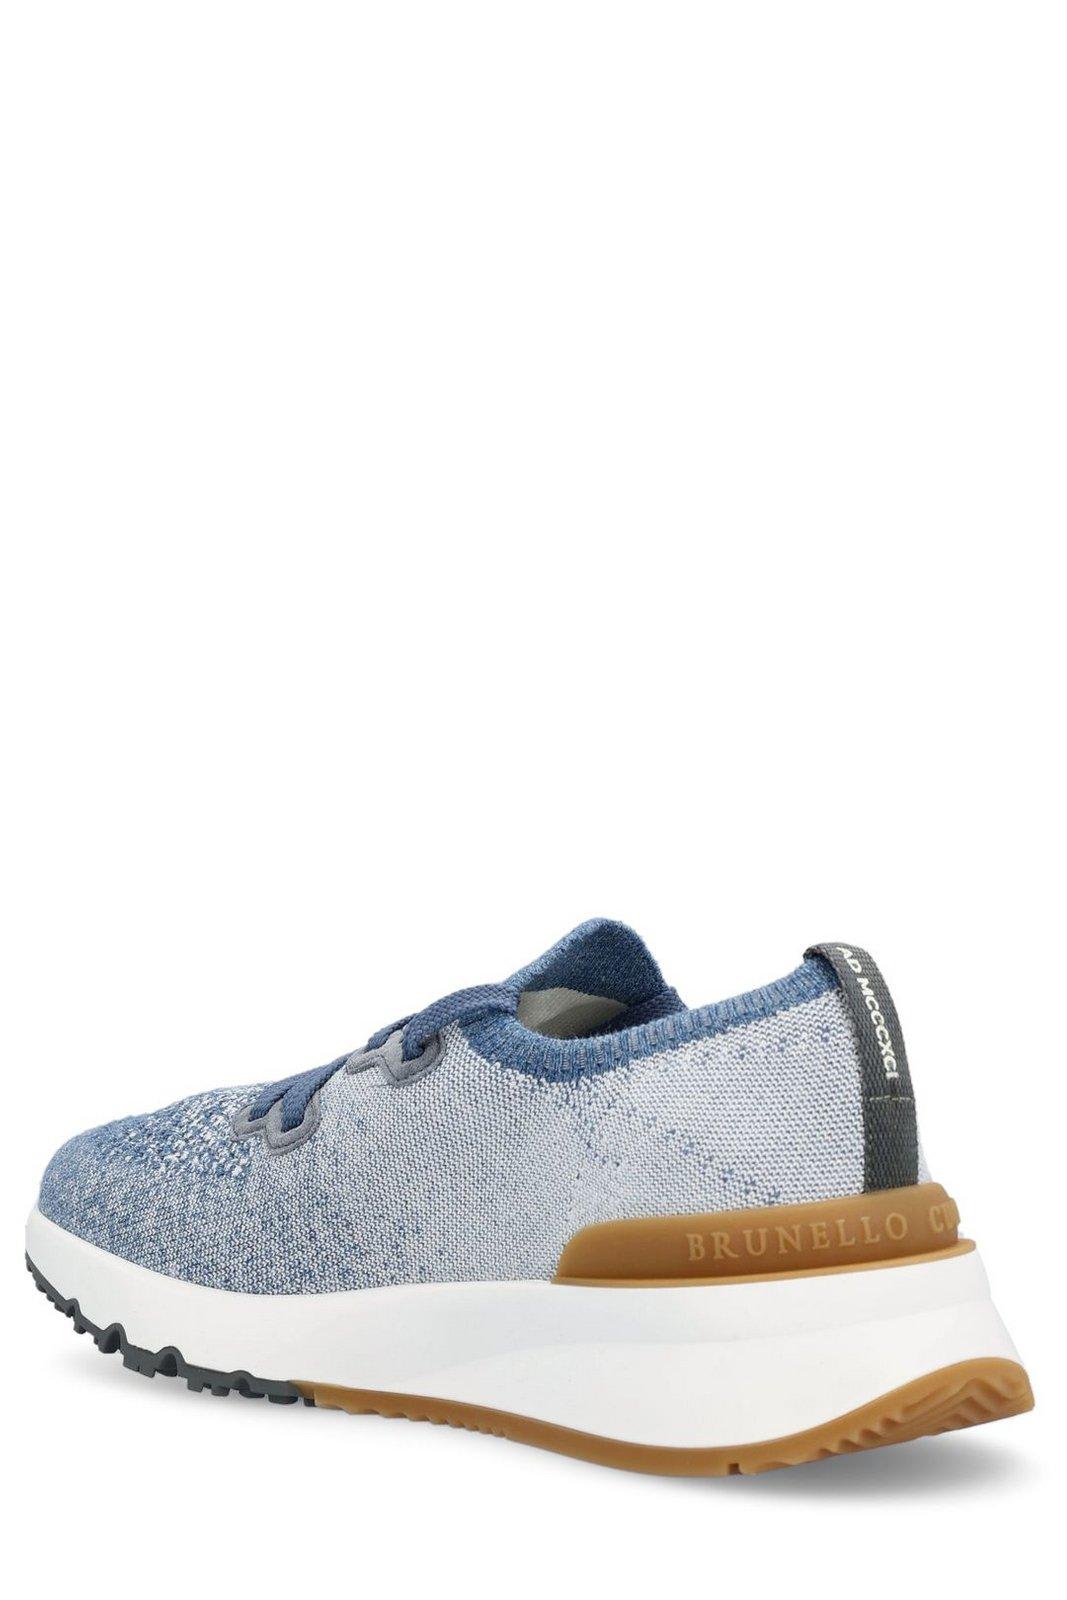 Shop Brunello Cucinelli Lace Up Sock Sneakers In Blue/white